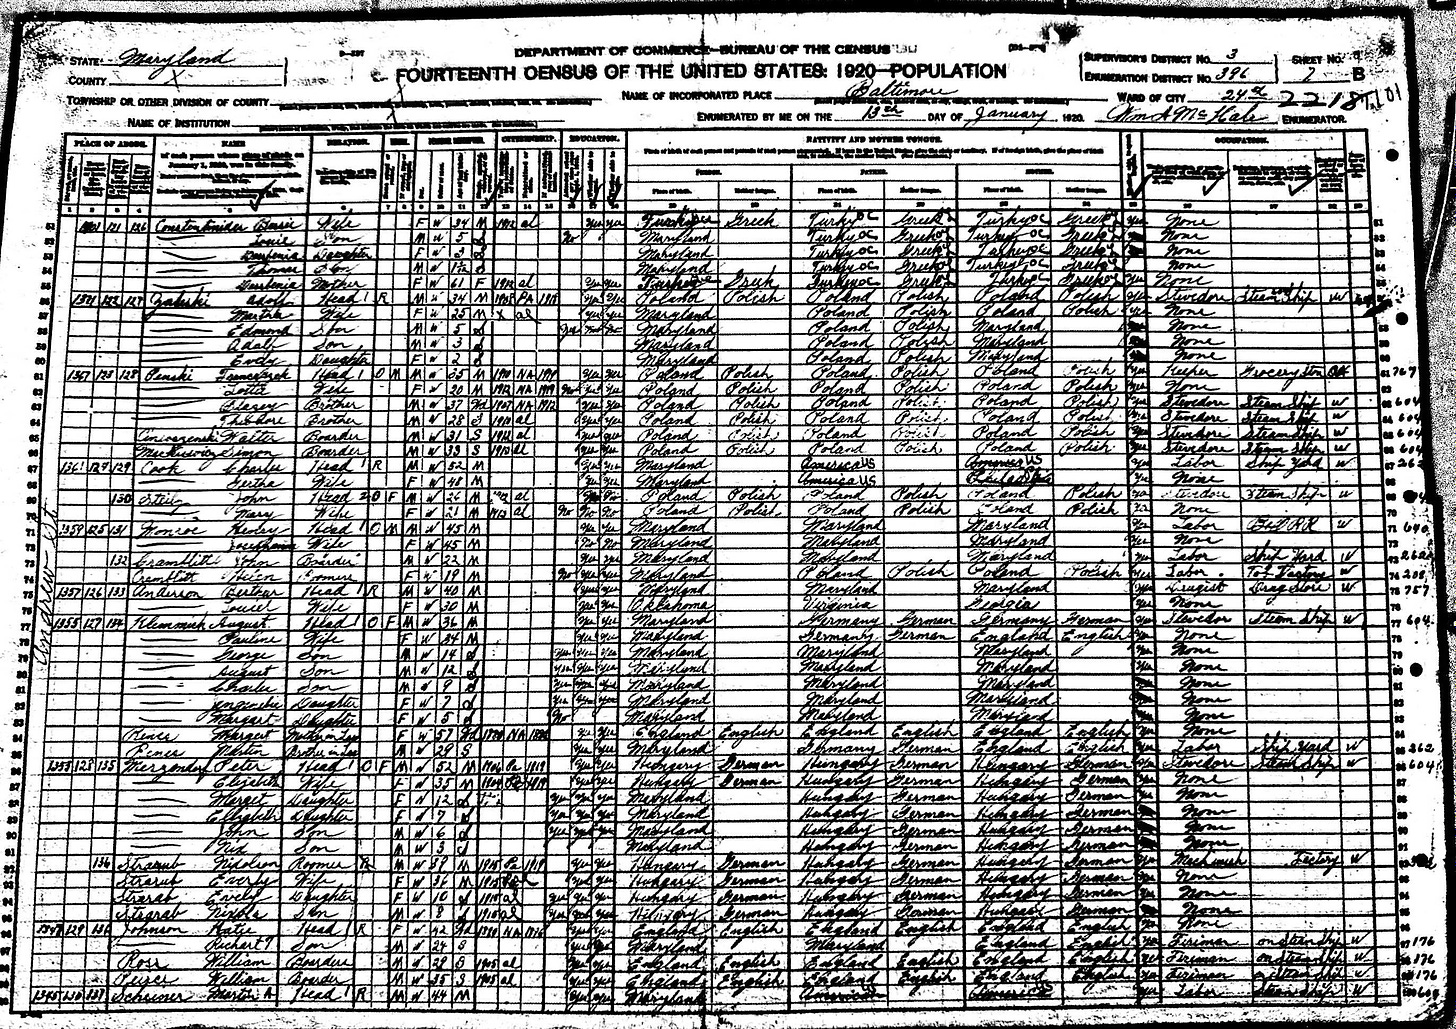 Record from the 1920 Census.